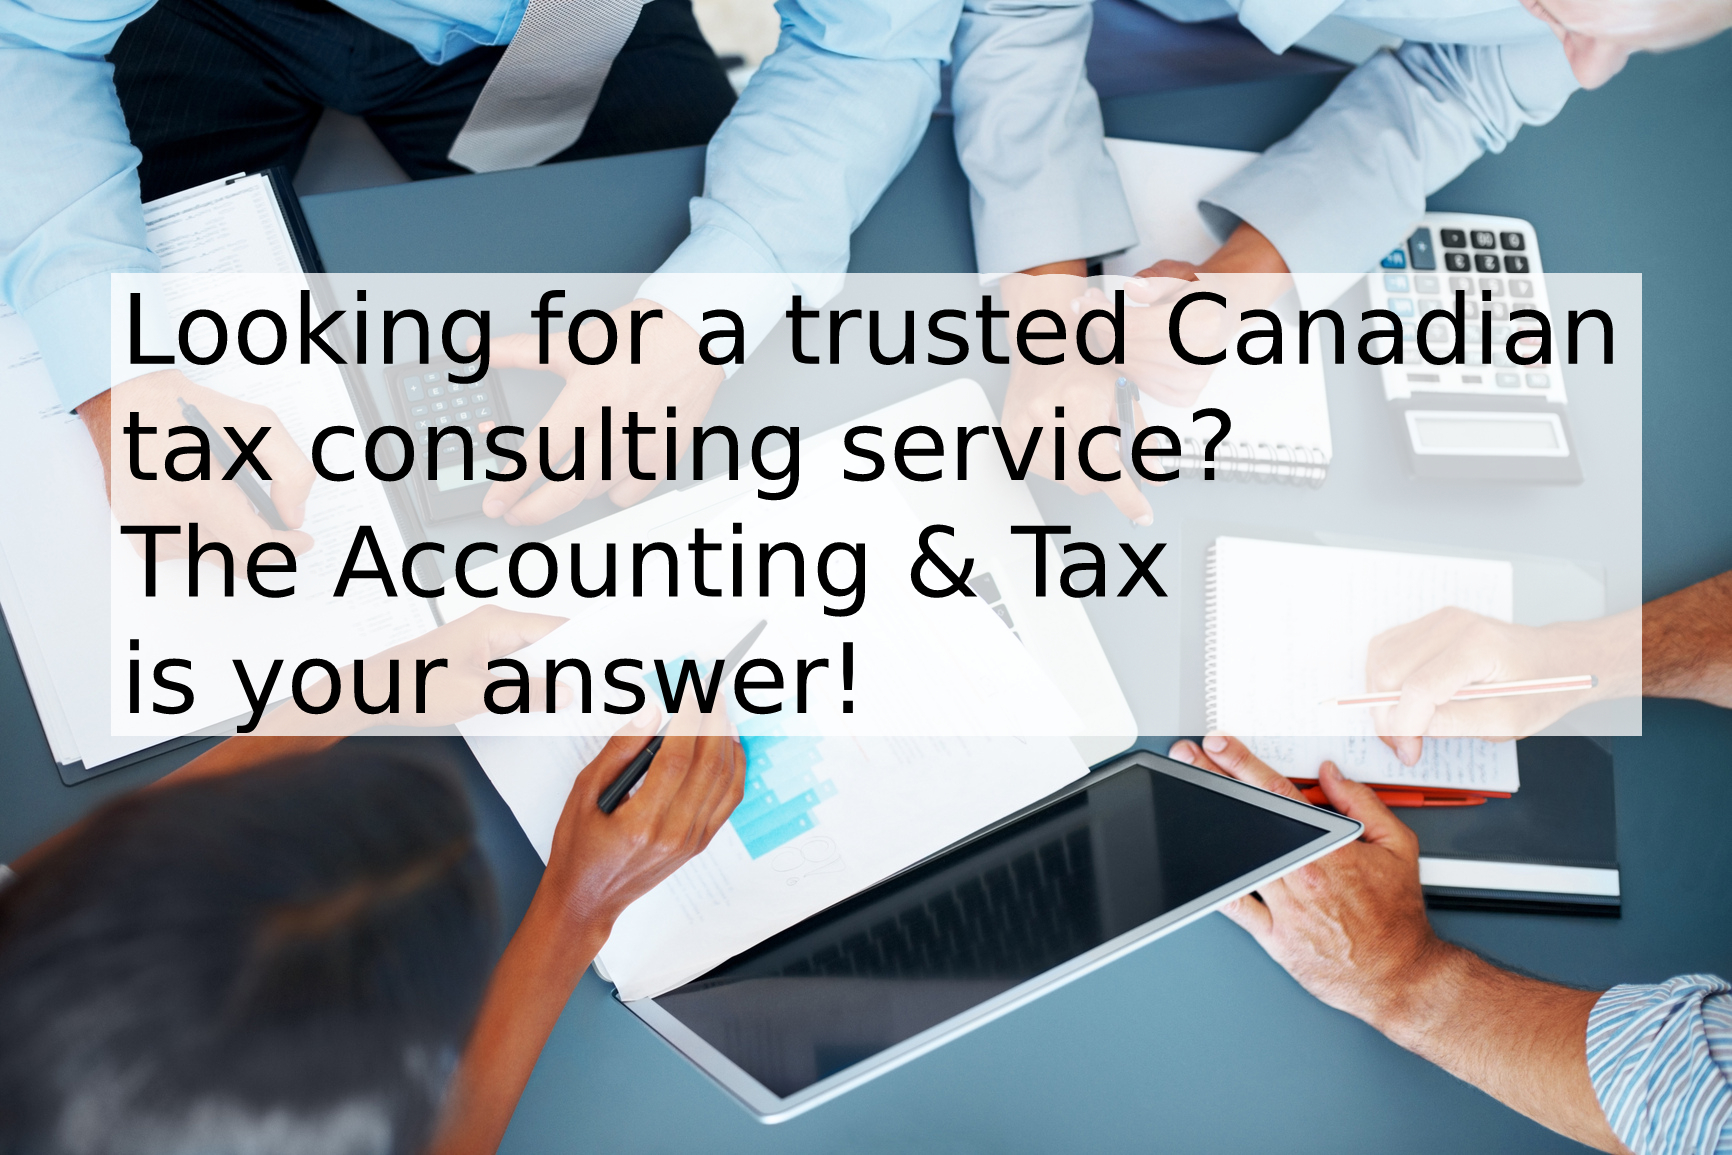 Looking for a trusted Canadian tax consulting service? The Accounting & Tax is your answer!